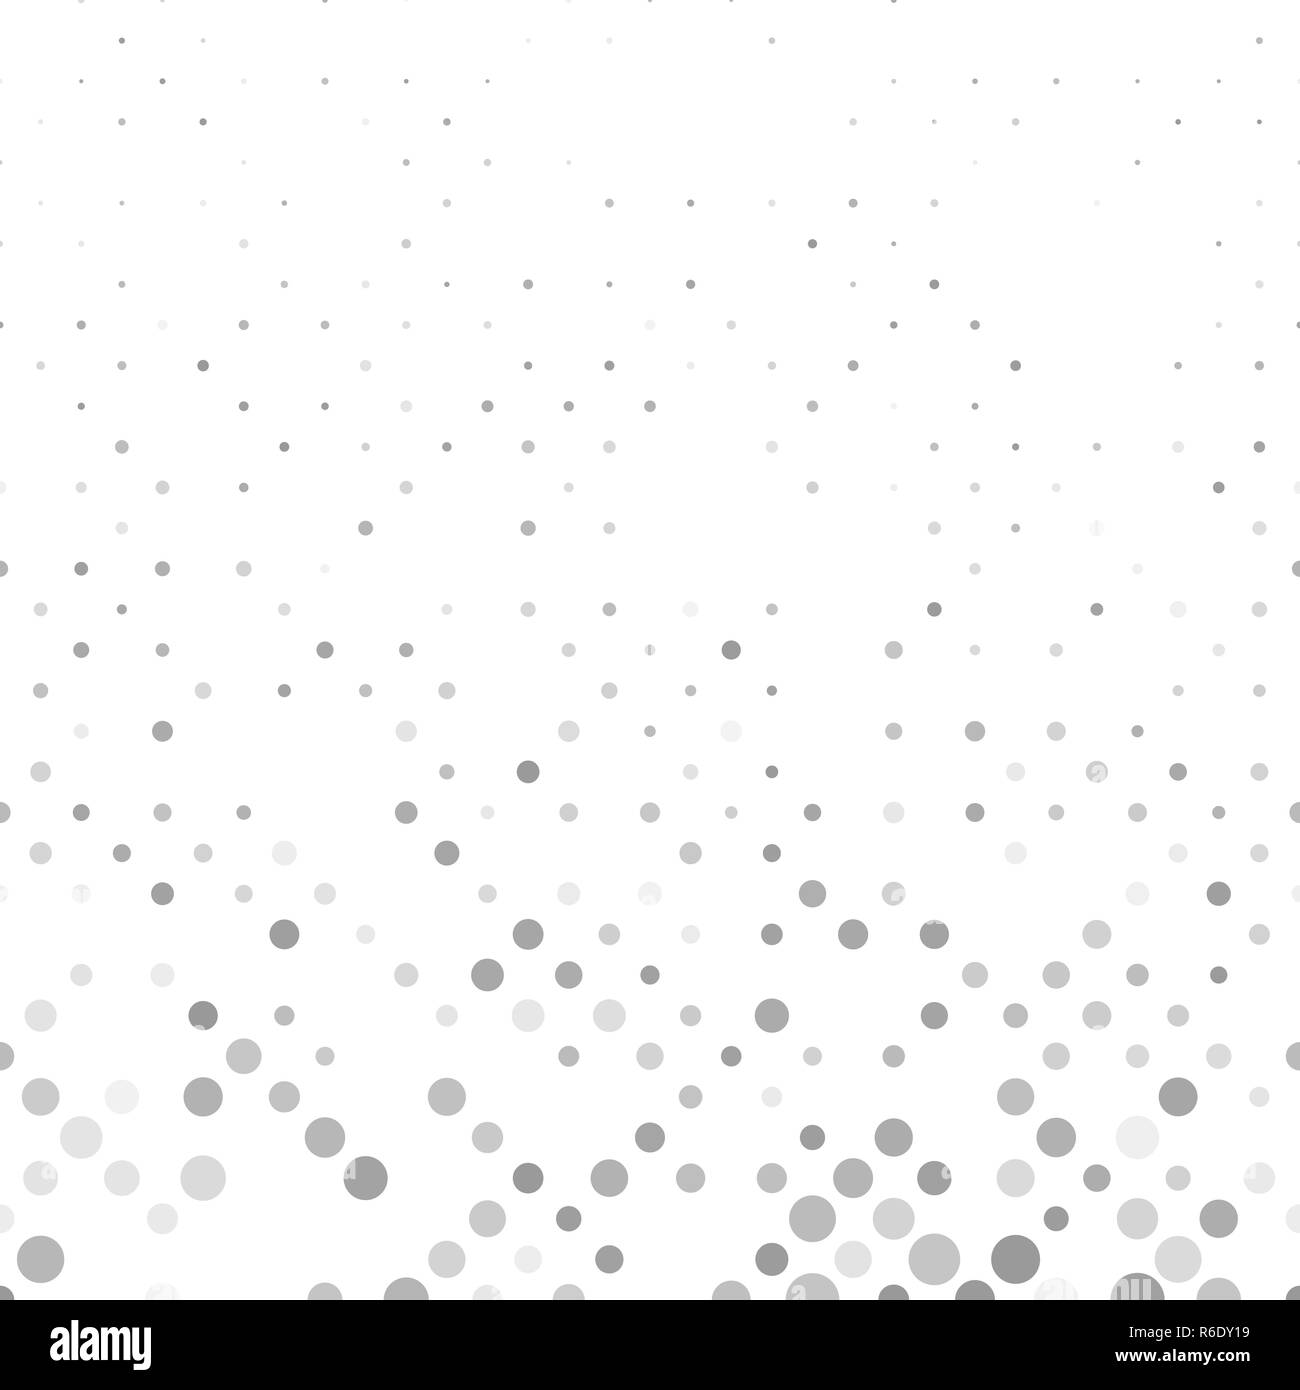 Dots background Black and White Stock Photos & Images - Alamy